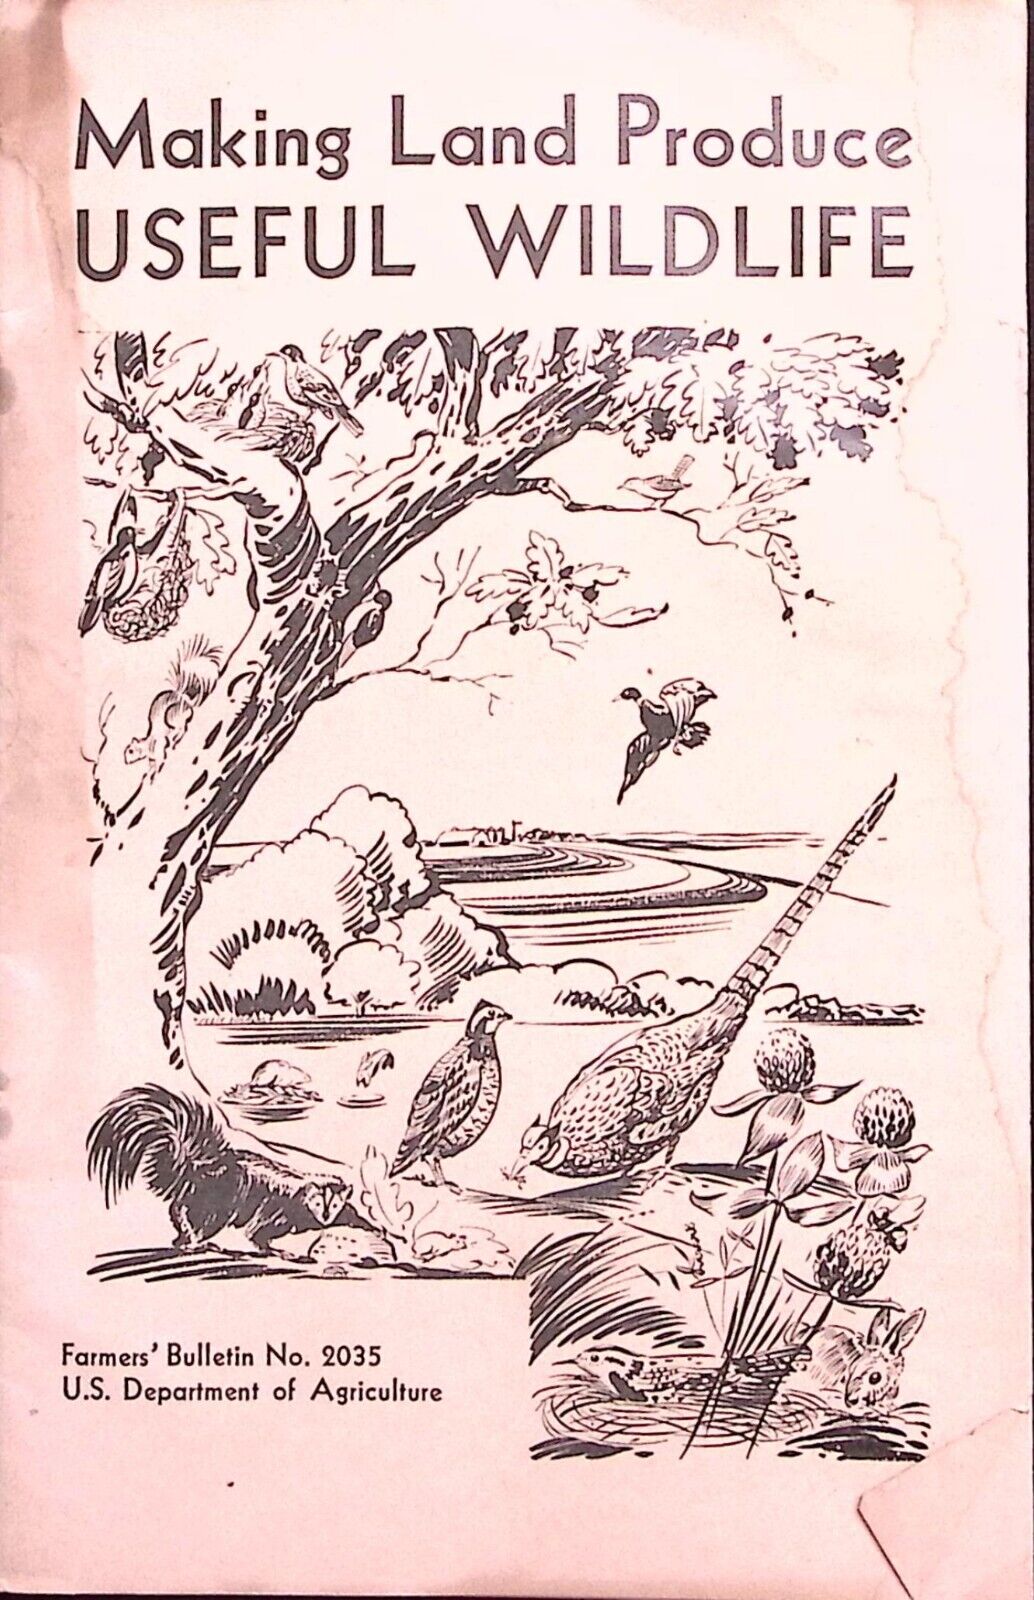 1969 US DEPARTMENT OF AGRICULTURE MAKING LAND PRODUCE USEFUL WILDLIFE BOOKLET Z9